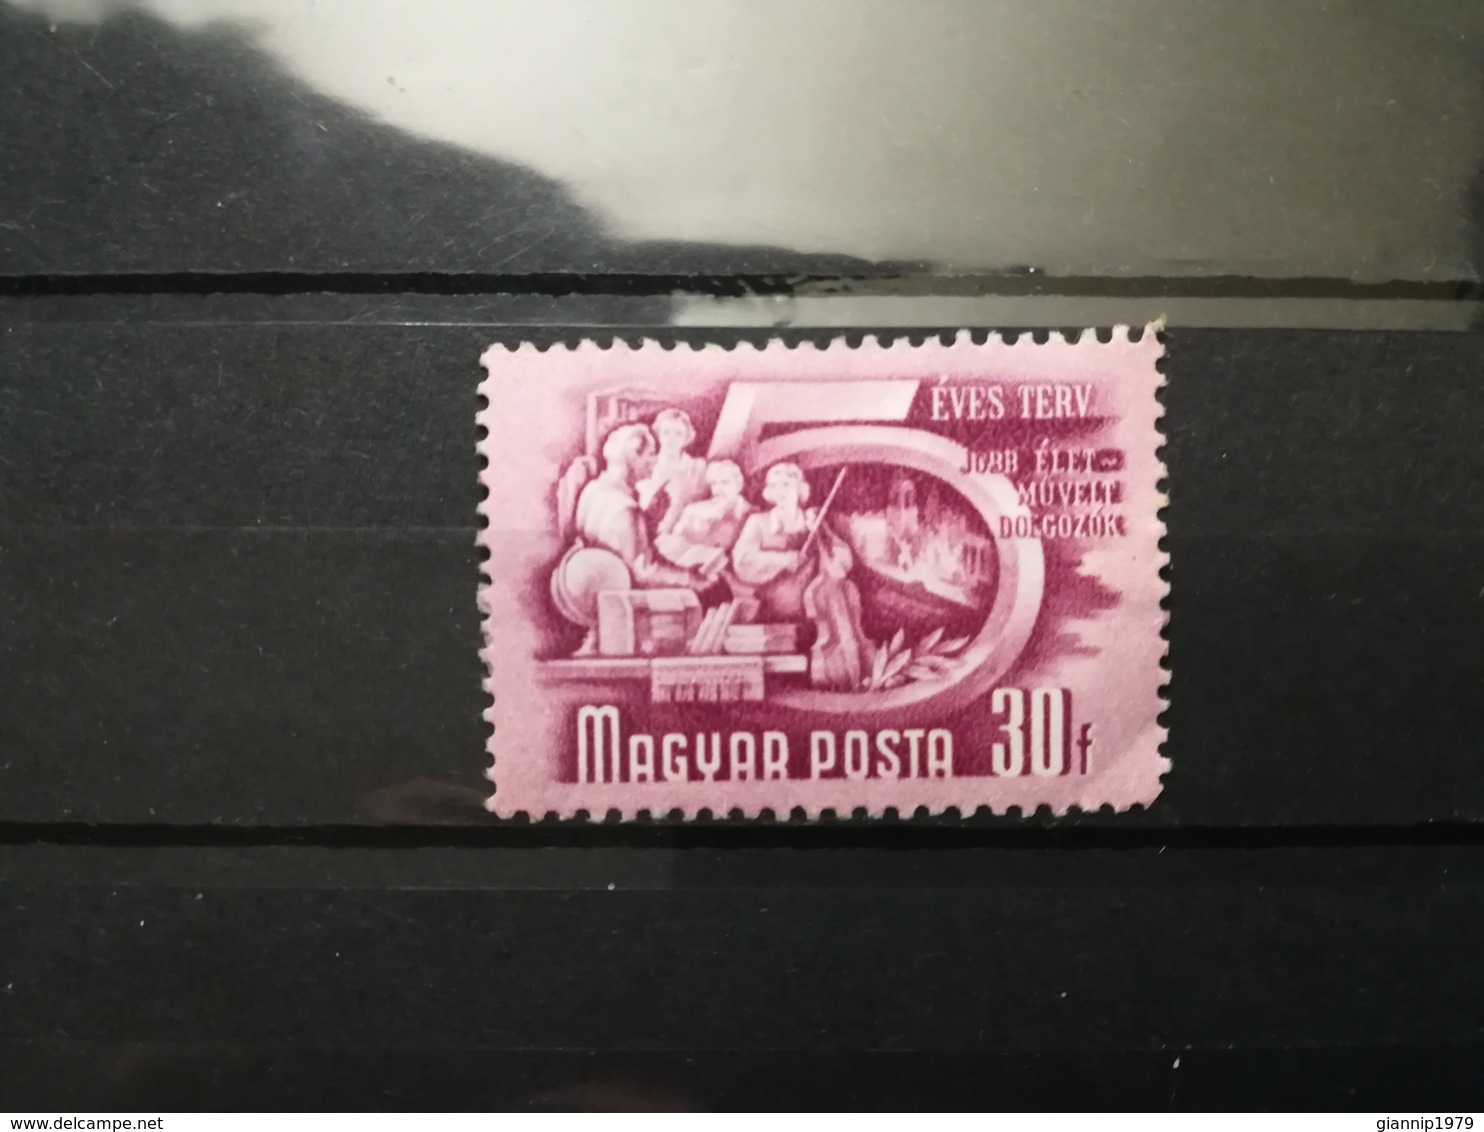 FRANCOBOLLI STAMPS UNGHERIA MAGYAR POSTA 1950 USED PLAN FIVE PIANO QUINQUENNALE HUNGARY - Usati